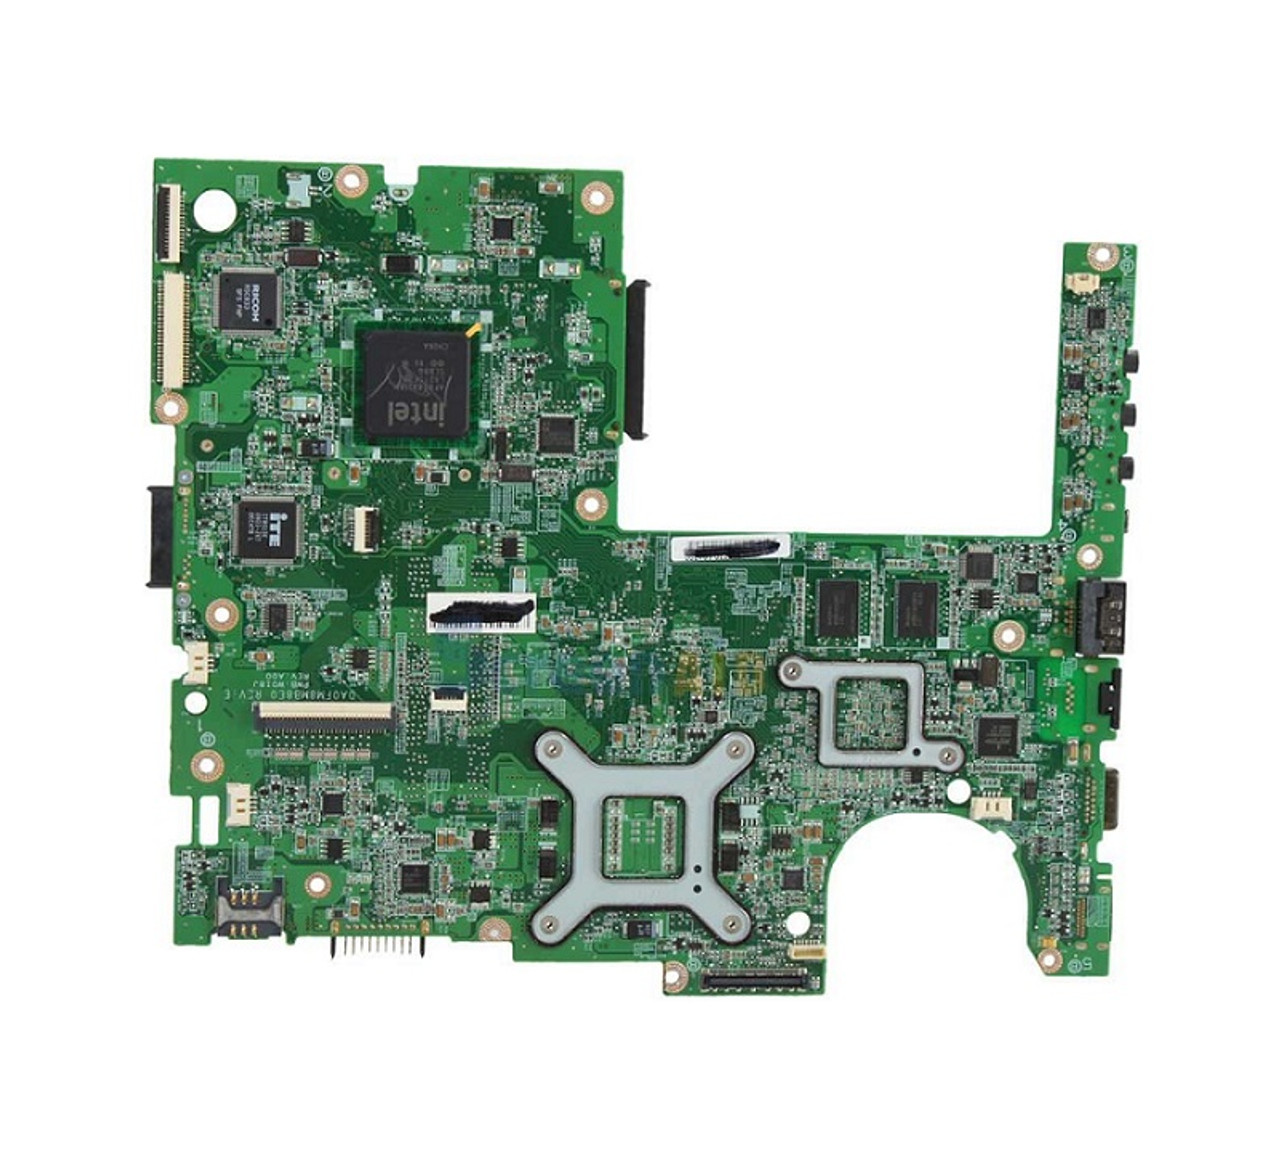 688277-501 - HP System Board (MotherBoard) for 2000 Series Notebook PCs Notebook PC (Refurbished)